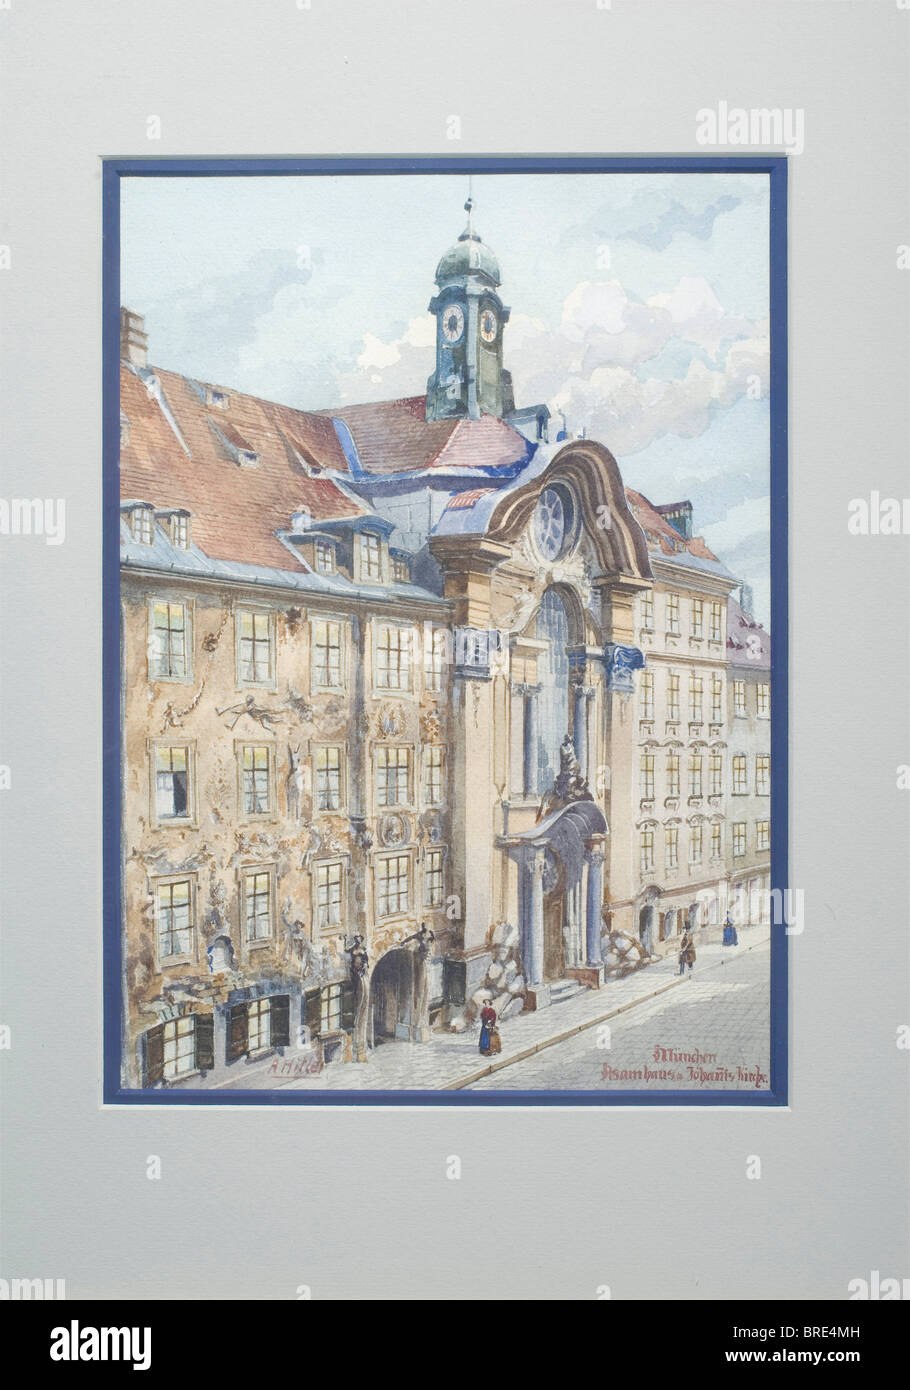 Adolf Hitler, the watercolour "Asamhaus & Johanis Kirche" Extremely well executed painting on textured watercolour pa fine arts, people, 1910s, 20th century, NS, National Socialism, Nazism, Third Reich, German Reich, Germany, German, National Socialist, Nazi, Nazi period, fascism, fine arts, art, art object, art objects, artful, precious, collectible, collector's item, collectibles, collector's items, rarity, rarities, Artist's Copyright has not to be cleared Stock Photo